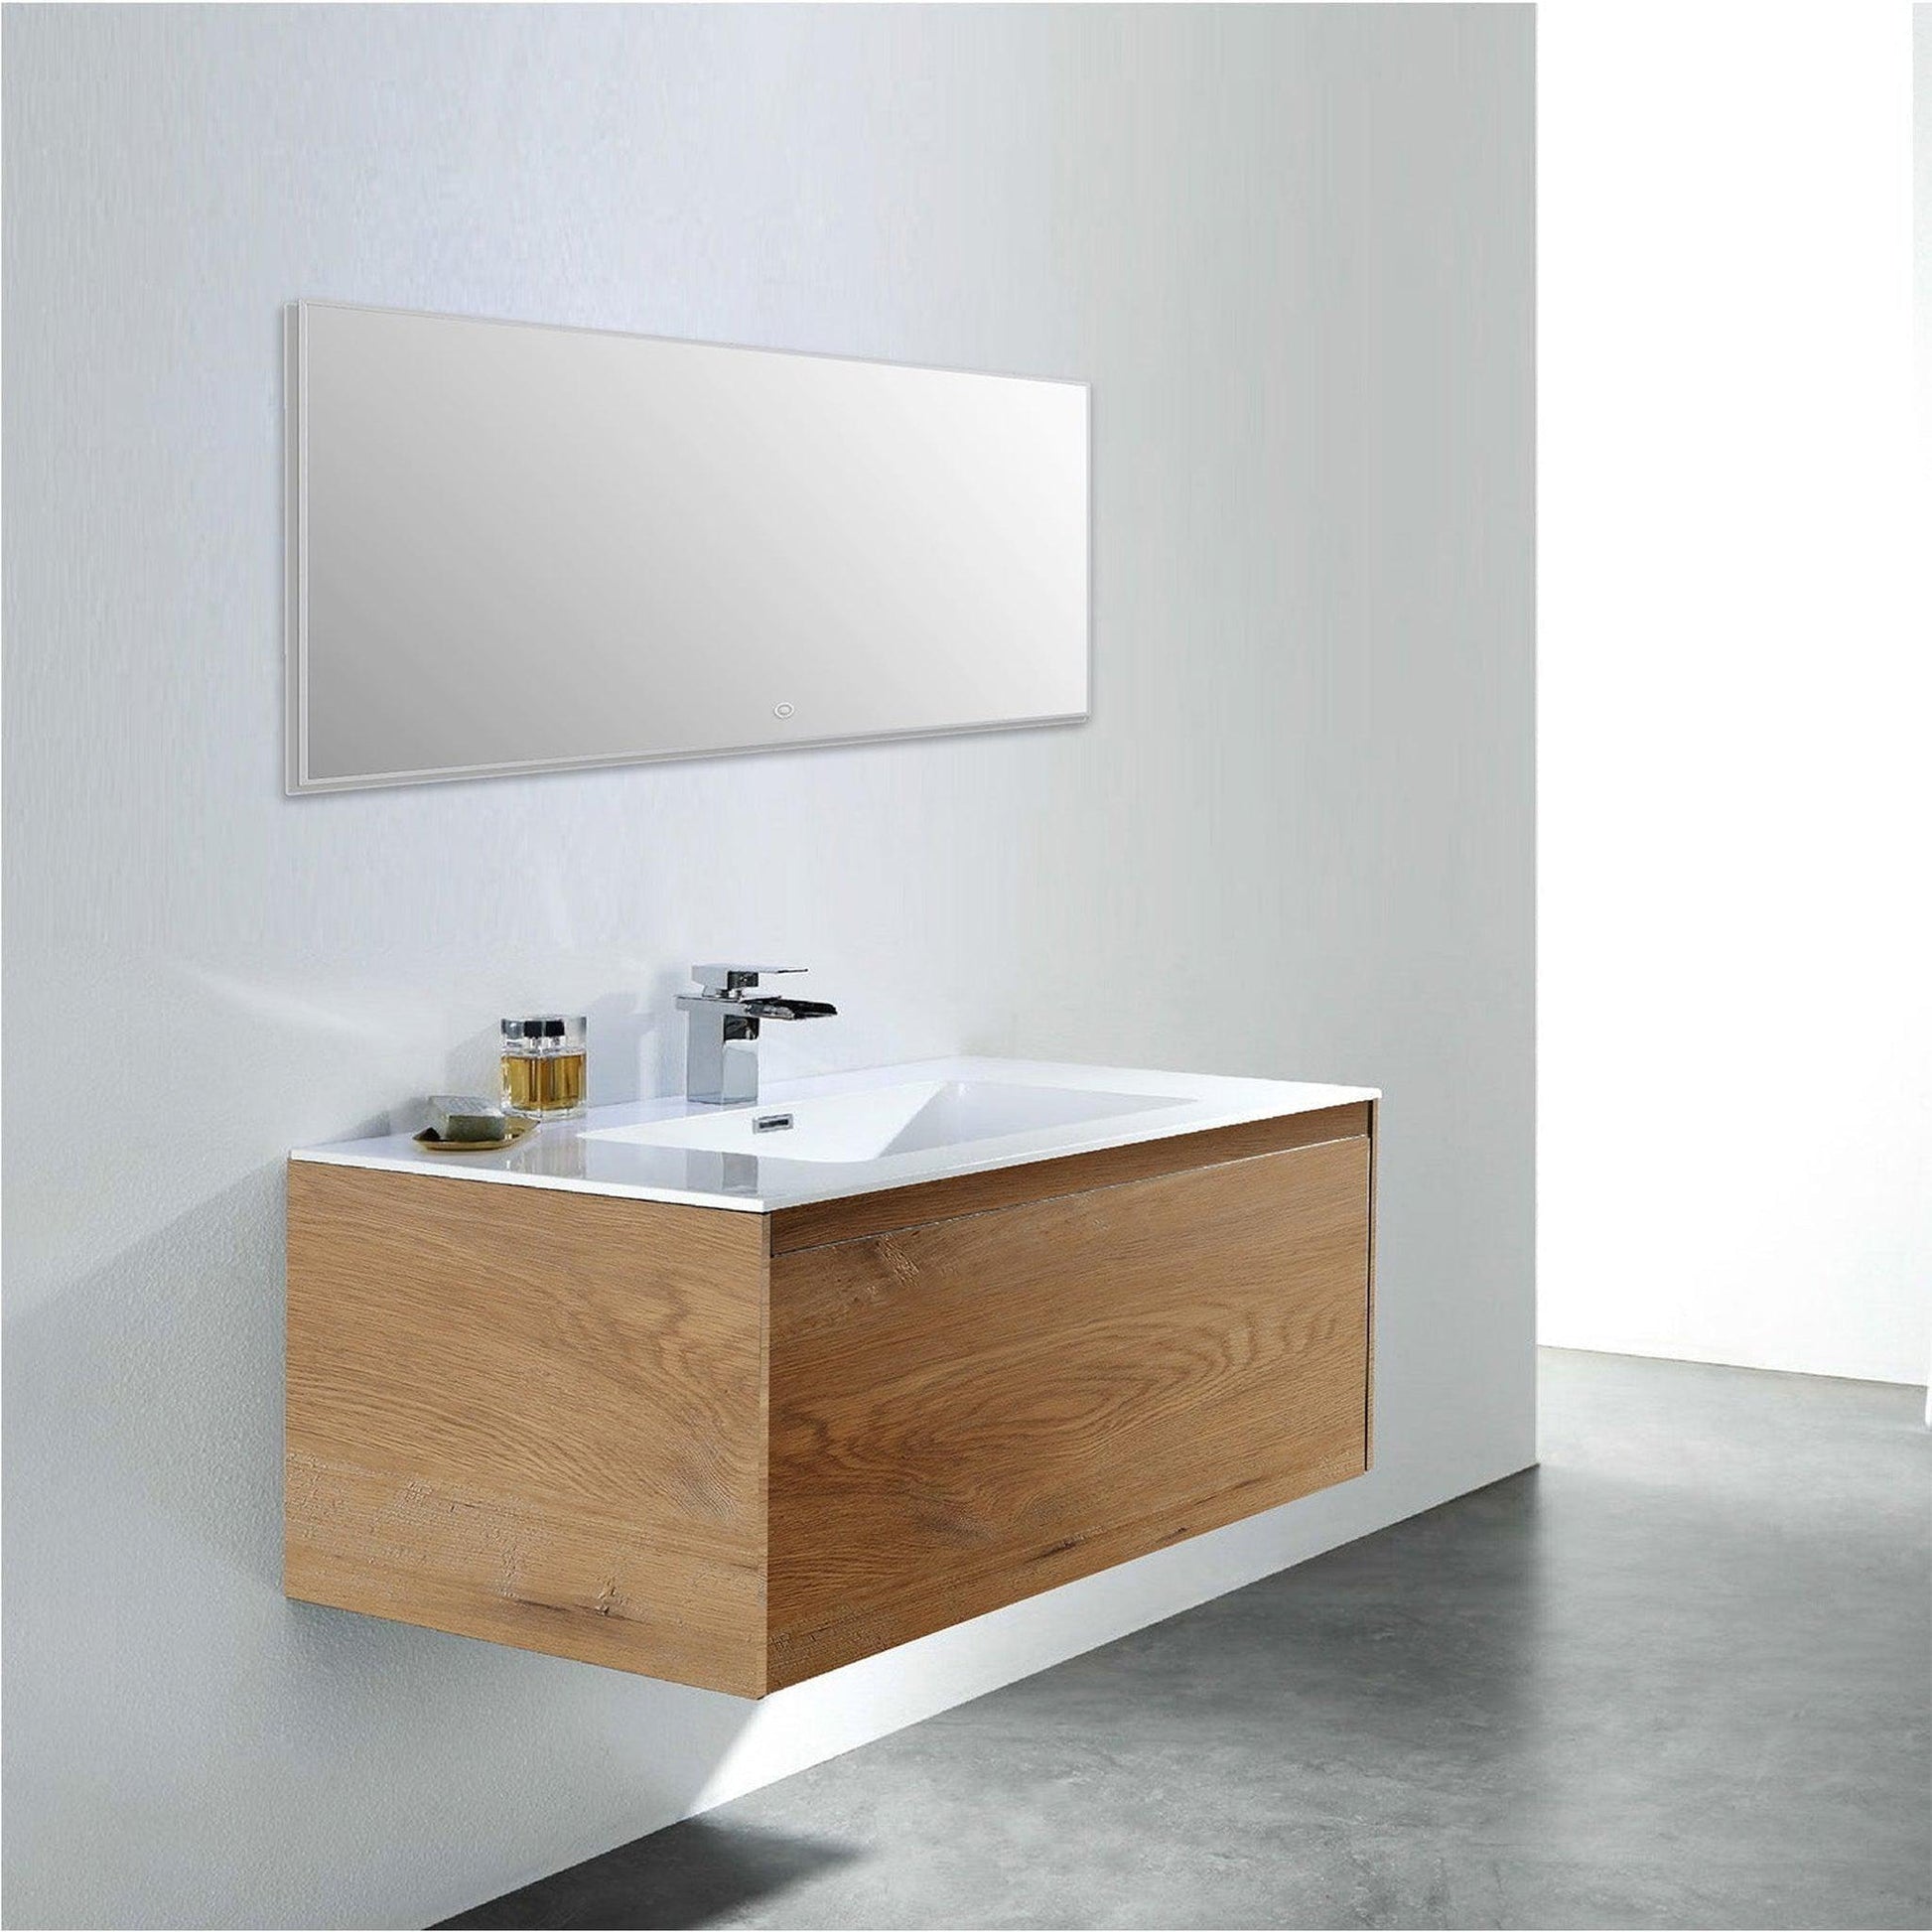 Eviva Madeira 36" x 19" Oak Wall-Mounted Bathroom Vanity With White Integrated Acrylic Sink